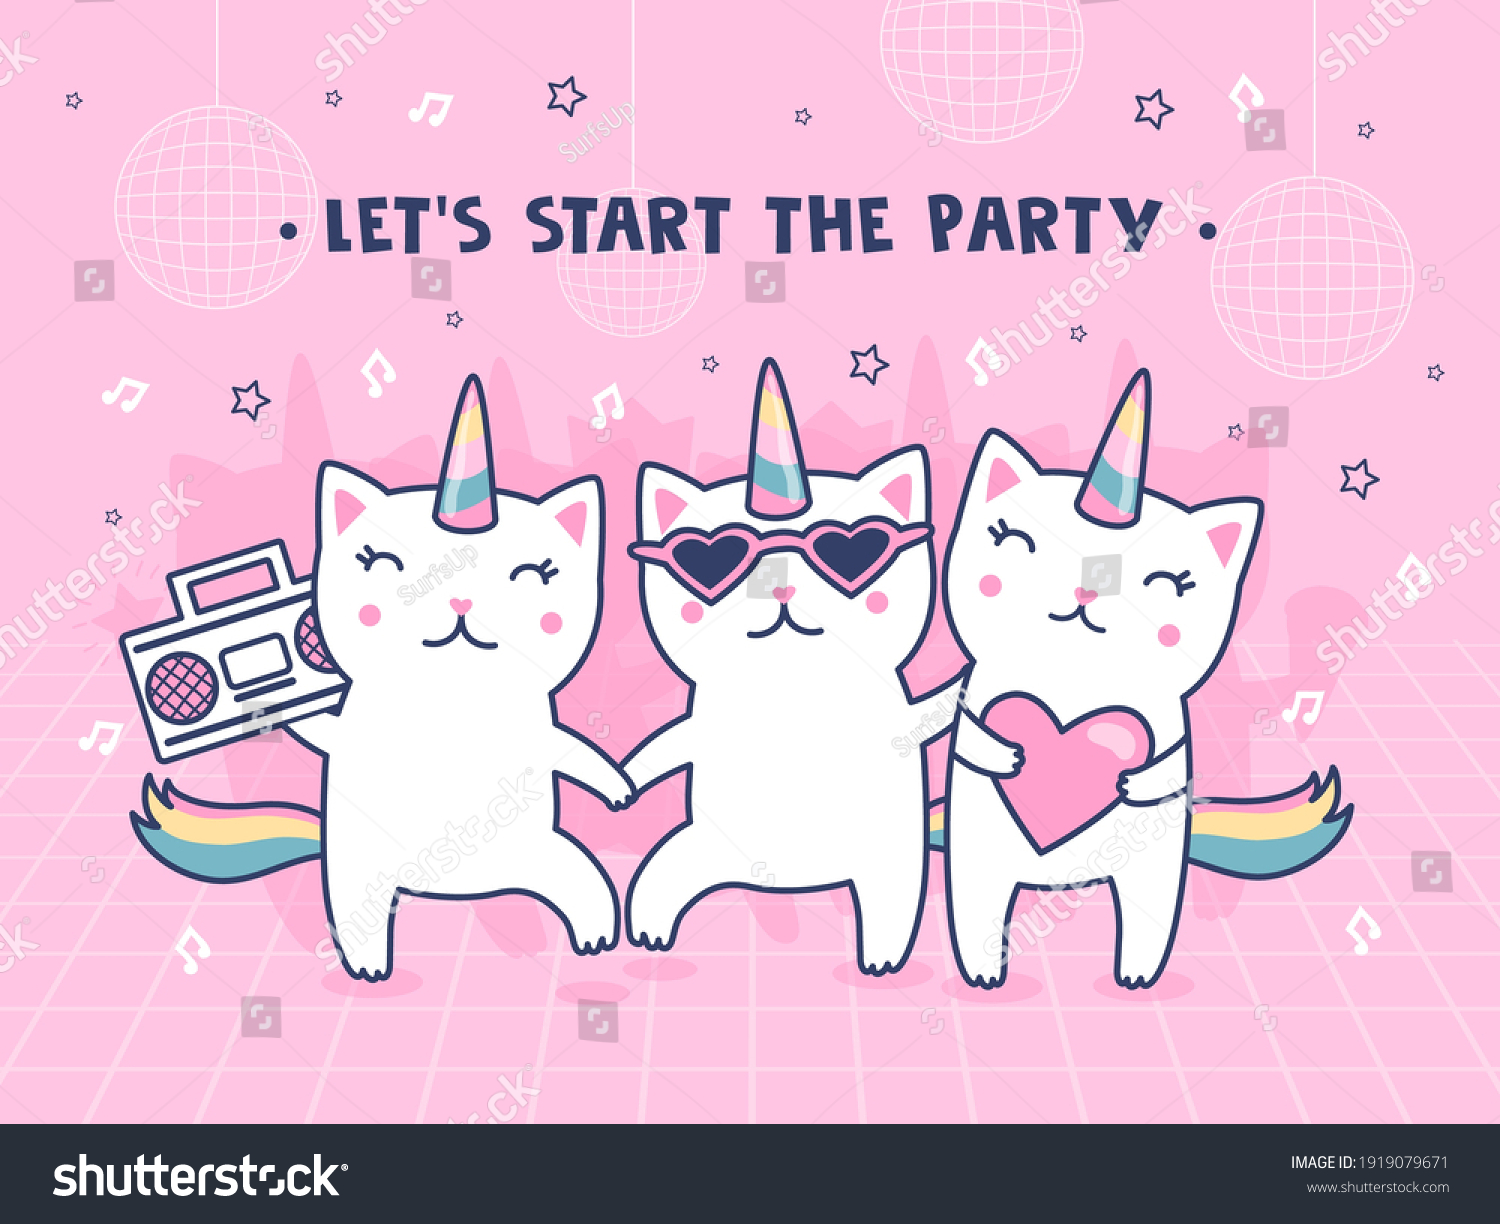 SVG of Cover design with unicorn cats. Cute dancing baby caticorns with rainbow tails vector illustrations with text on pink backgrounds. Party and fun concept for poster, website or webpage background svg